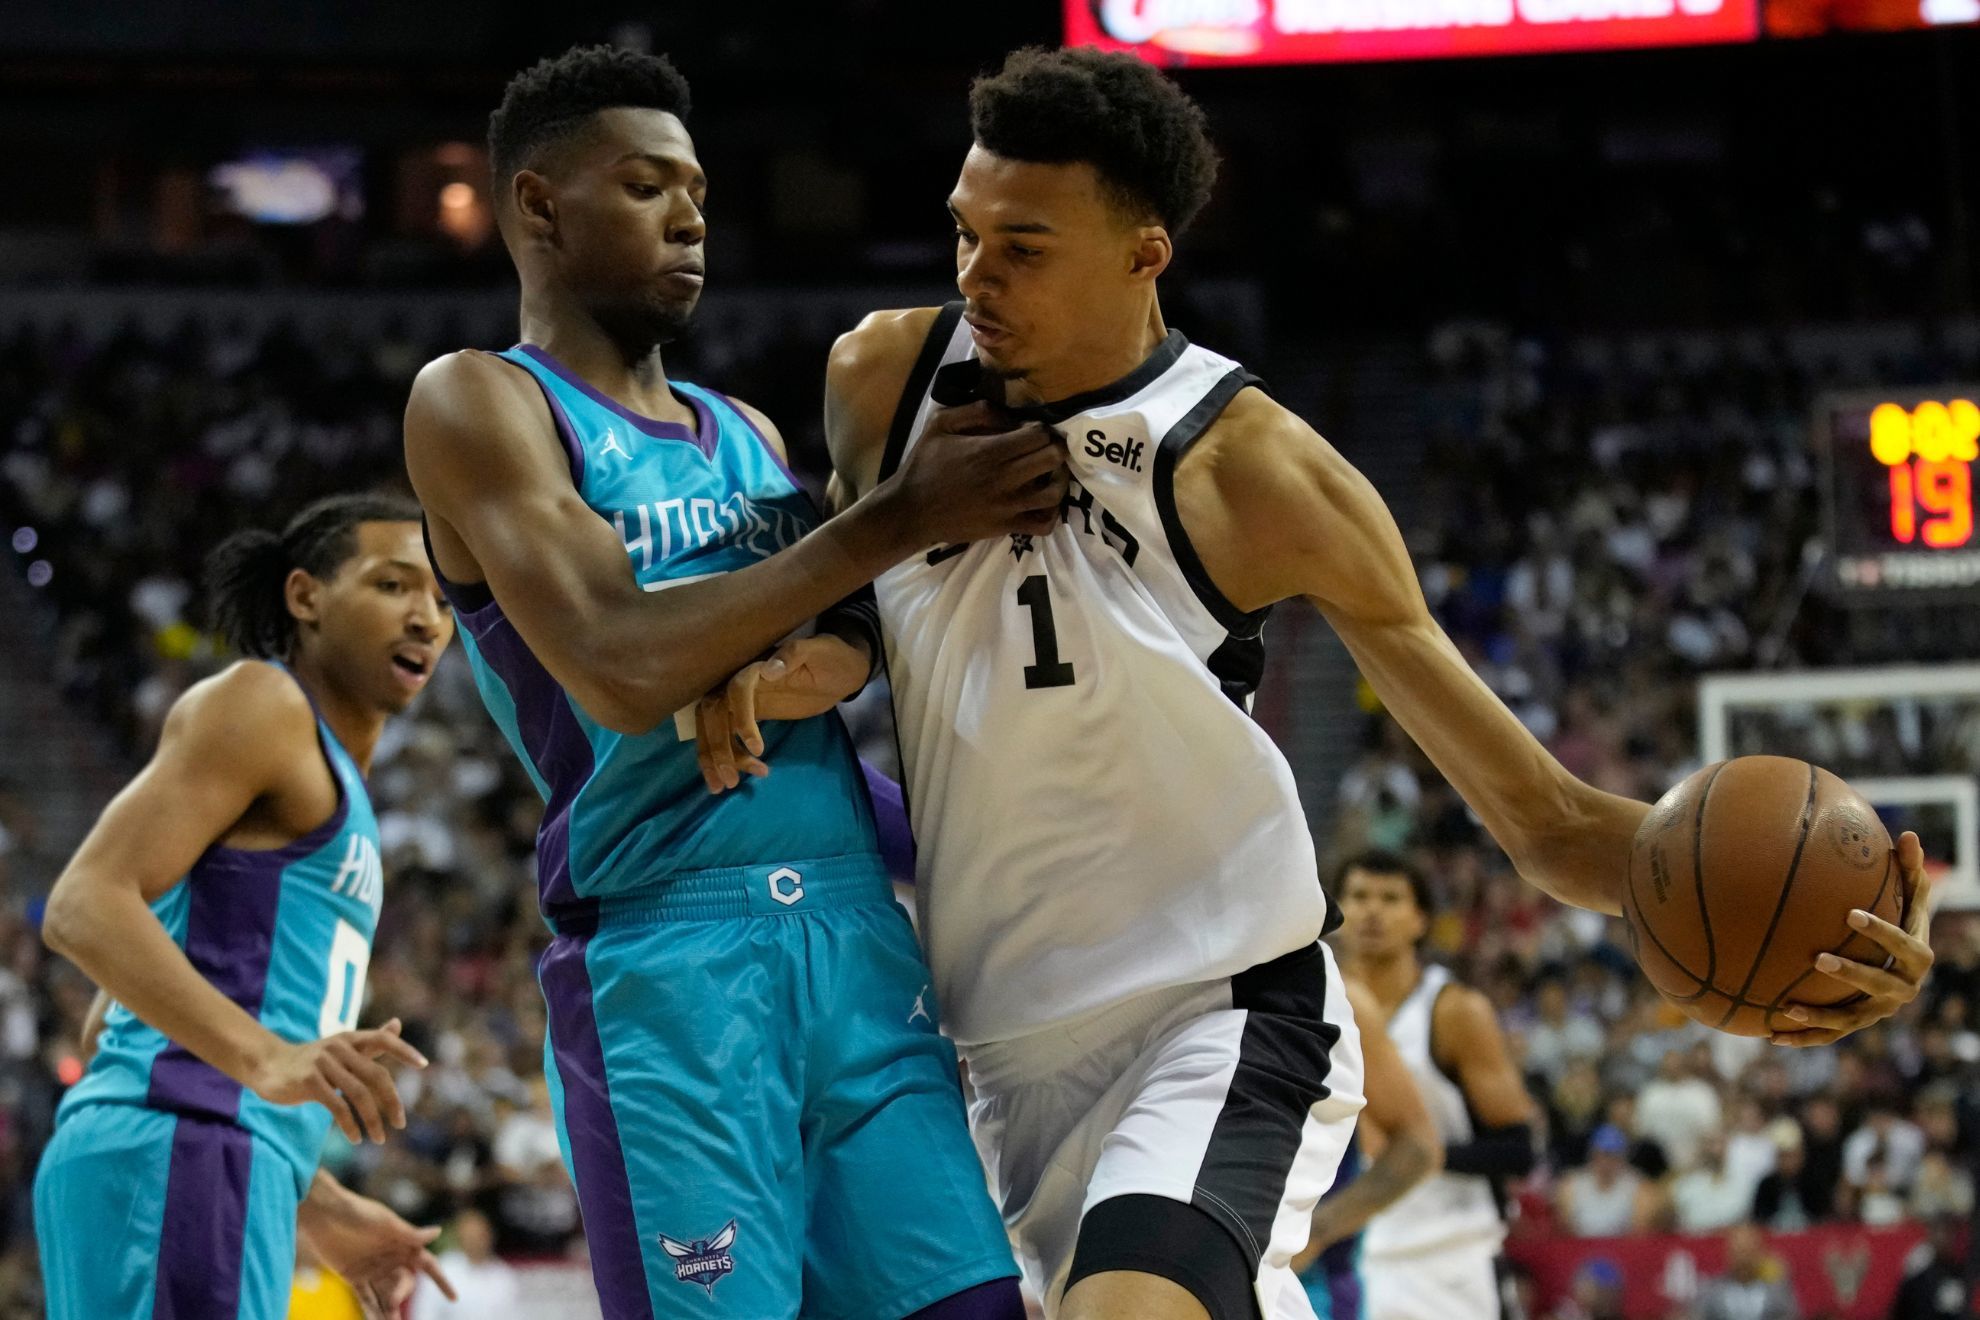 Wembanyama suffers two welcome to the NBA moments in Summer League debut